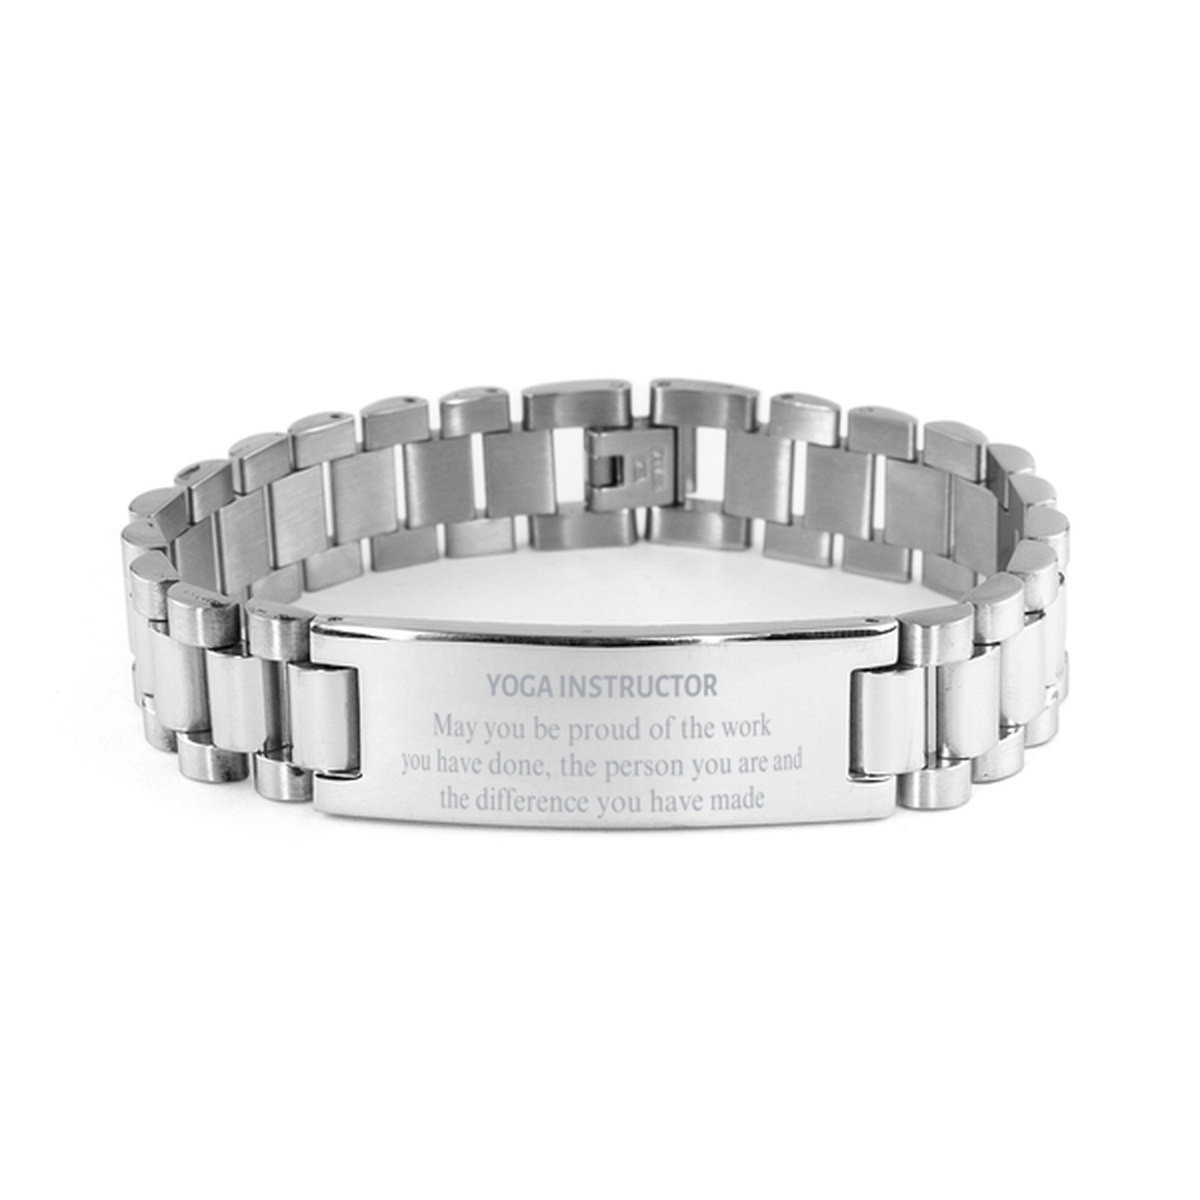 Yoga Instructor May you be proud of the work you have done, Retirement Yoga Instructor Ladder Stainless Steel Bracelet for Colleague Appreciation Gifts Amazing for Yoga Instructor